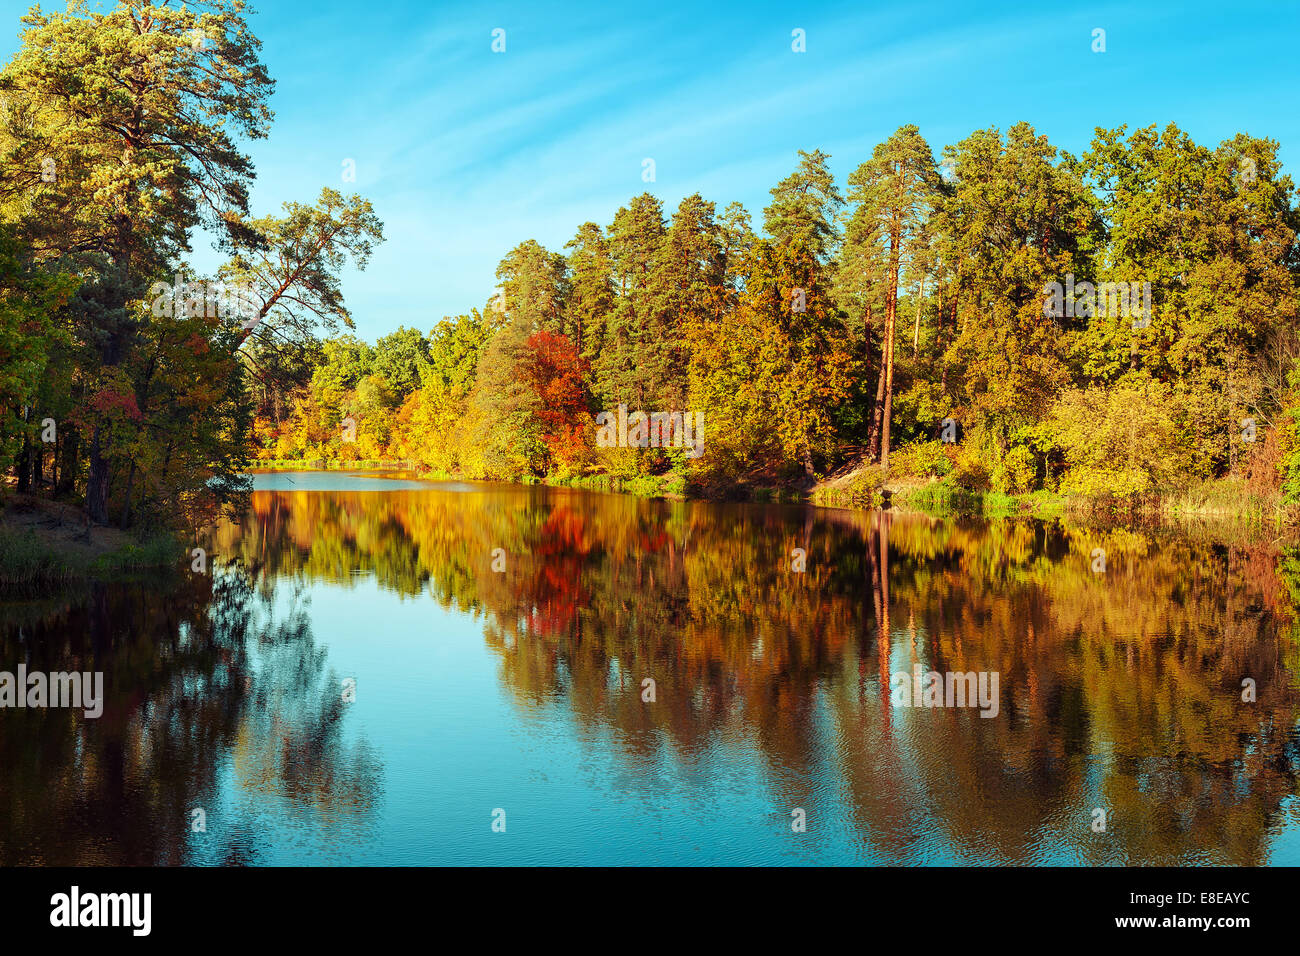 Sunny day in outdoor park with lake and colorful autumn trees reflection under blue sky. Amazing bright colors of autumn nature Stock Photo